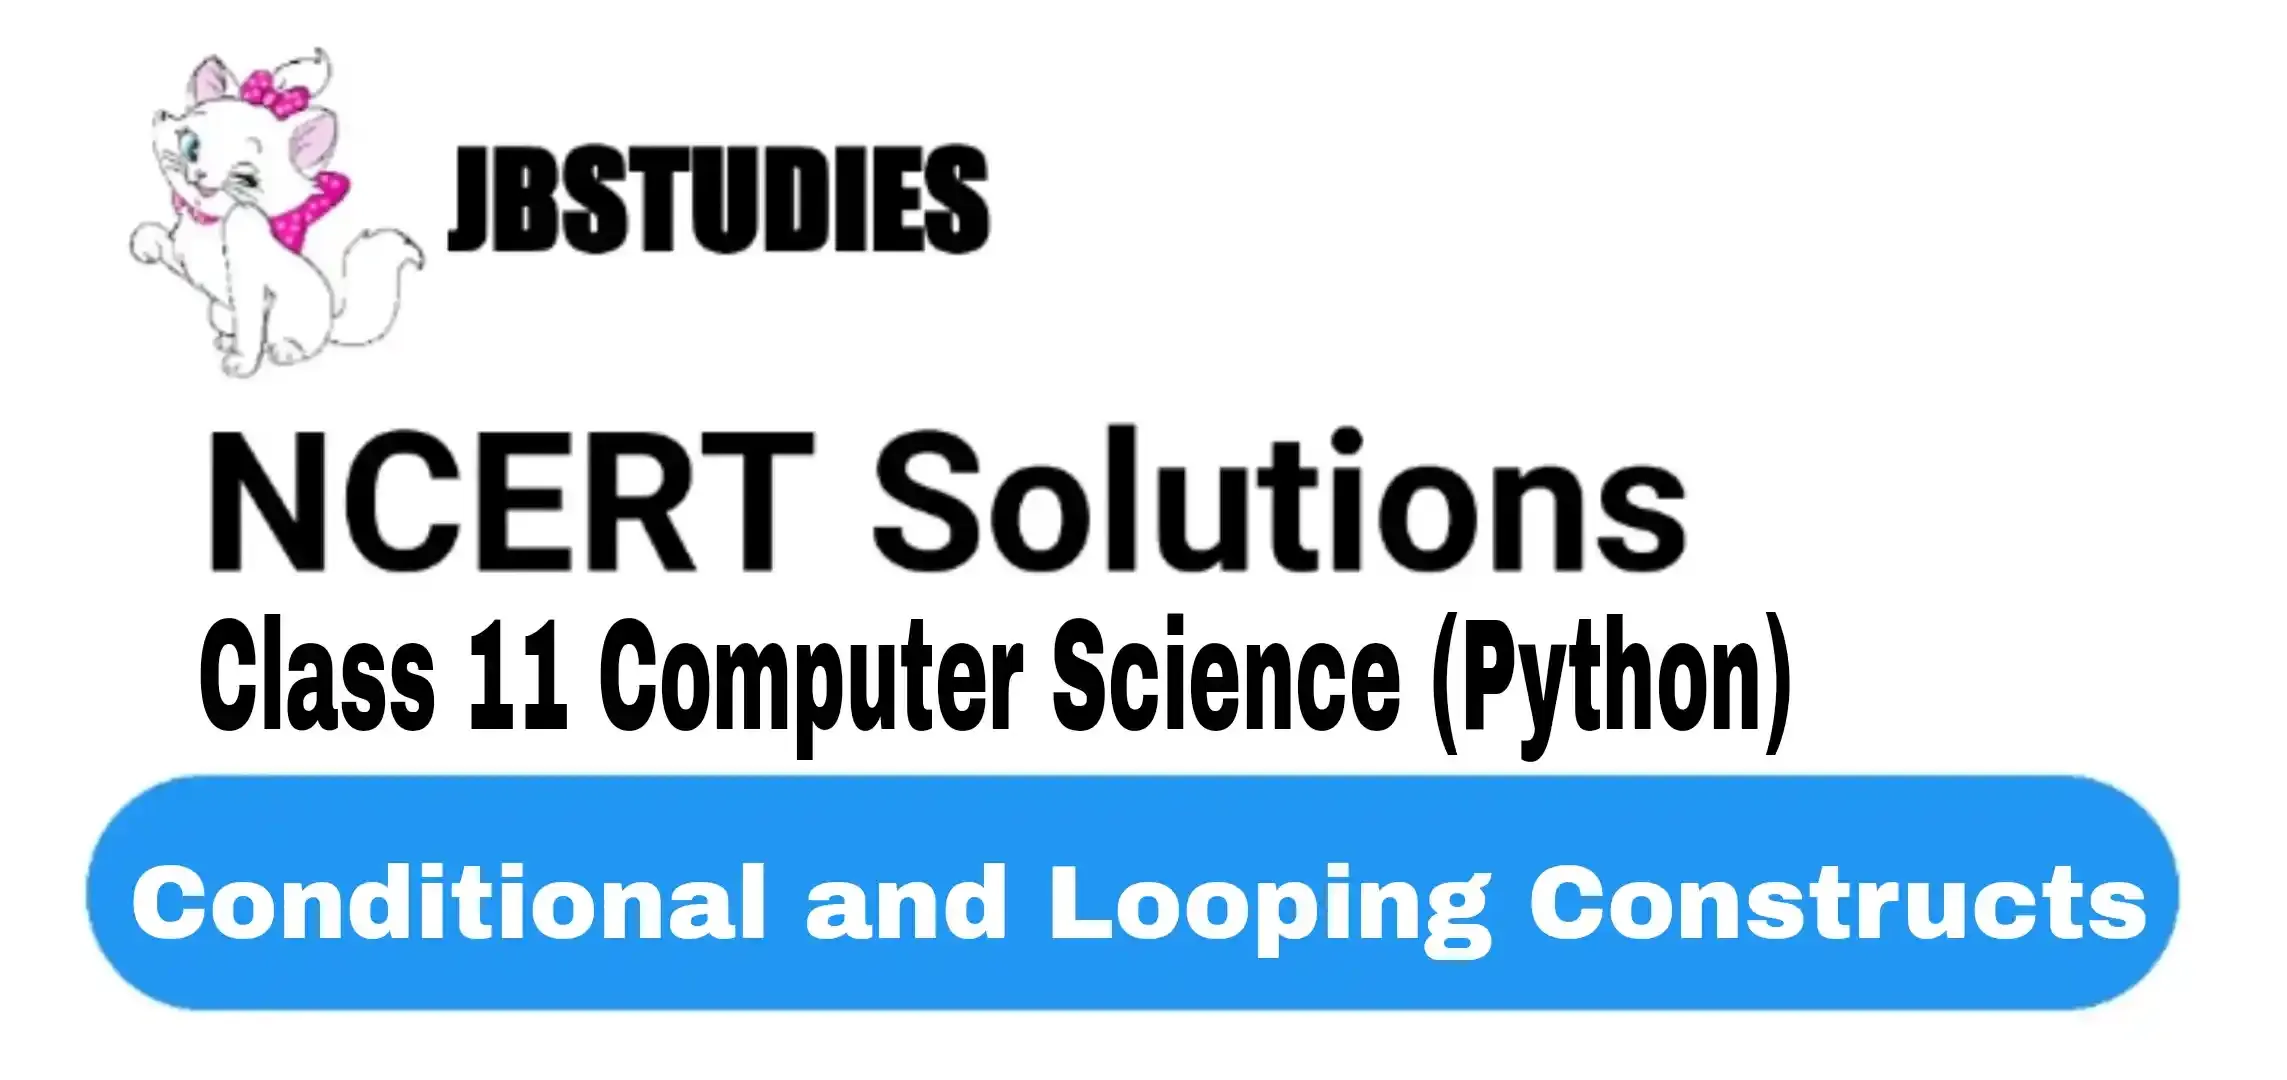 Solutions Class 11 Computer Science (Python) Chapter-11 (Conditional and Looping Constructs)